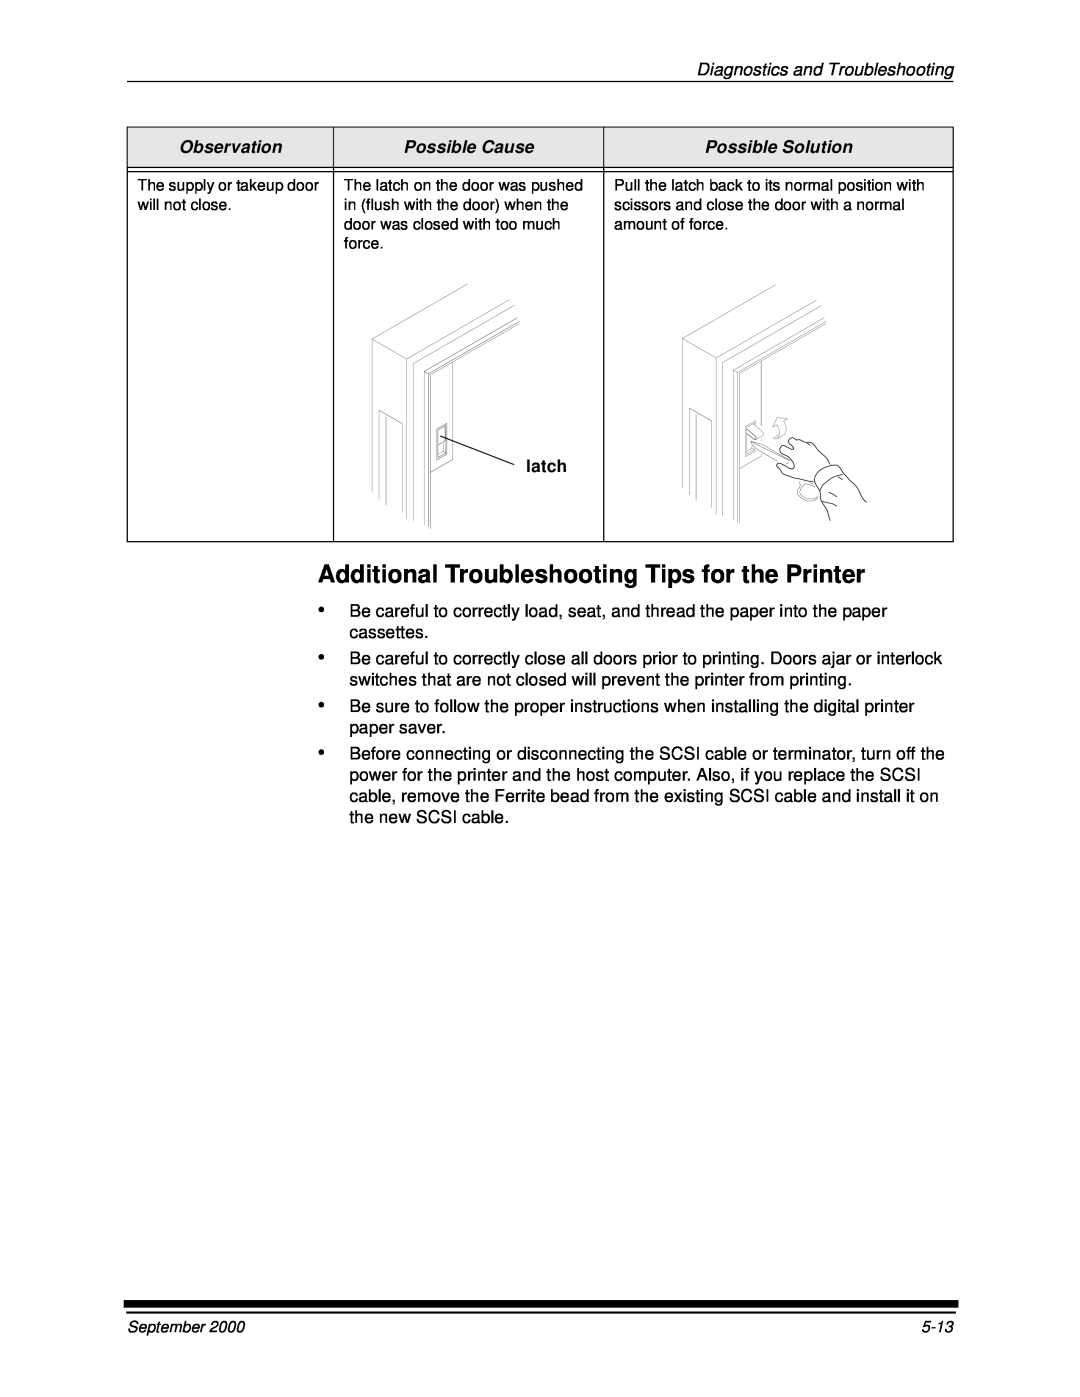 Kodak 20R manual Additional Troubleshooting Tips for the Printer, Diagnostics and Troubleshooting, latch 